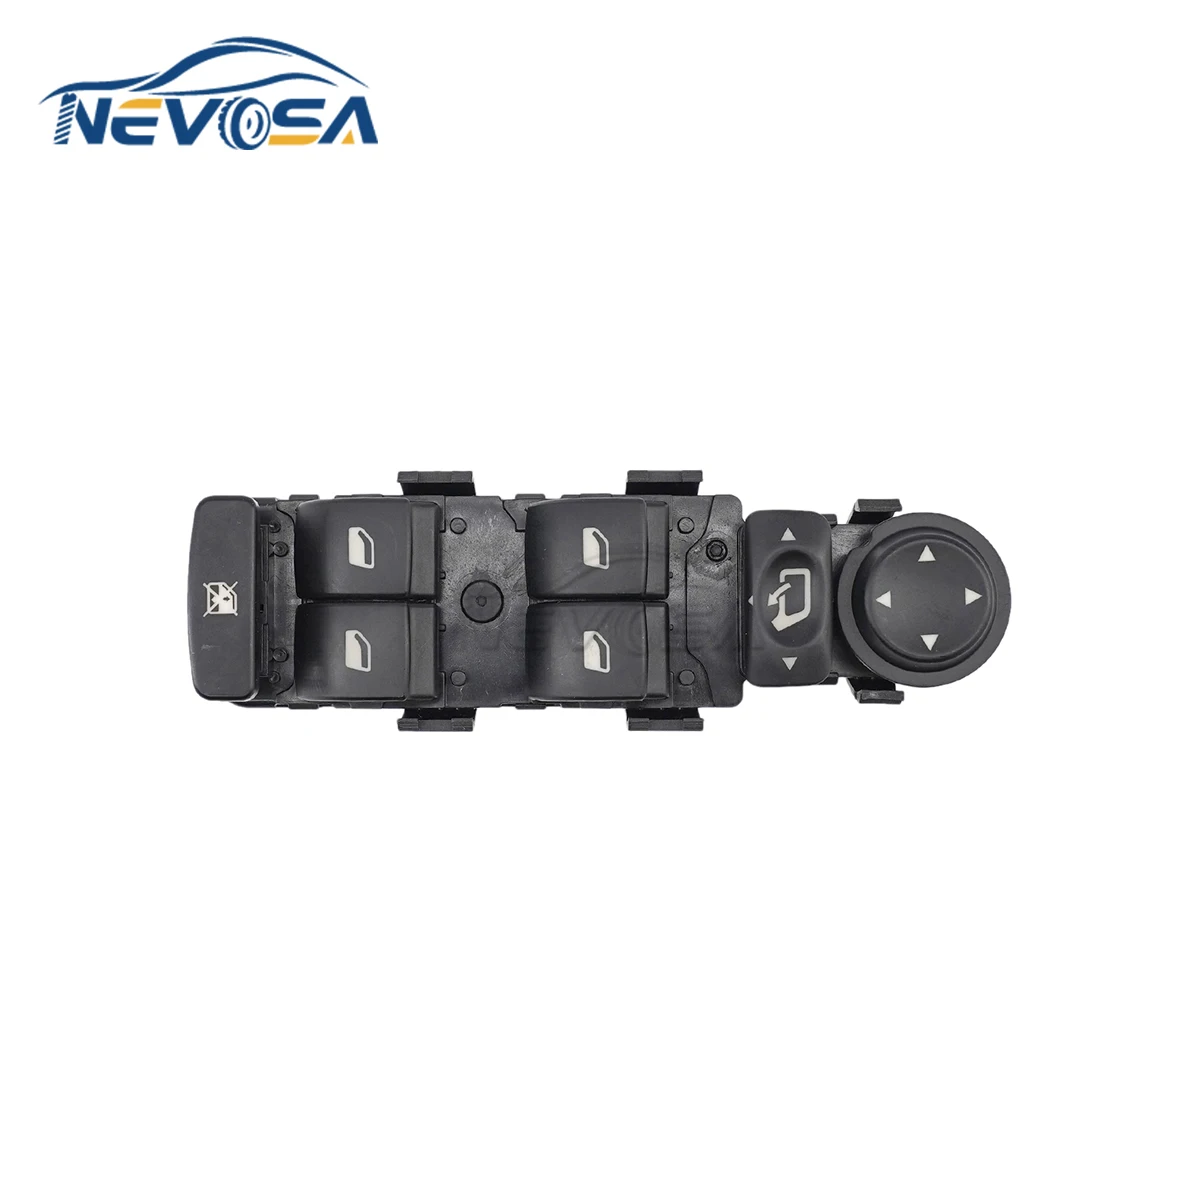 Electric Master Control Power Window Switch For Citroen C5 C8 Peugeot 807  2001 2002 2003 2004-2008 6554.QH 6554QH 6554.HQ 6554HQ